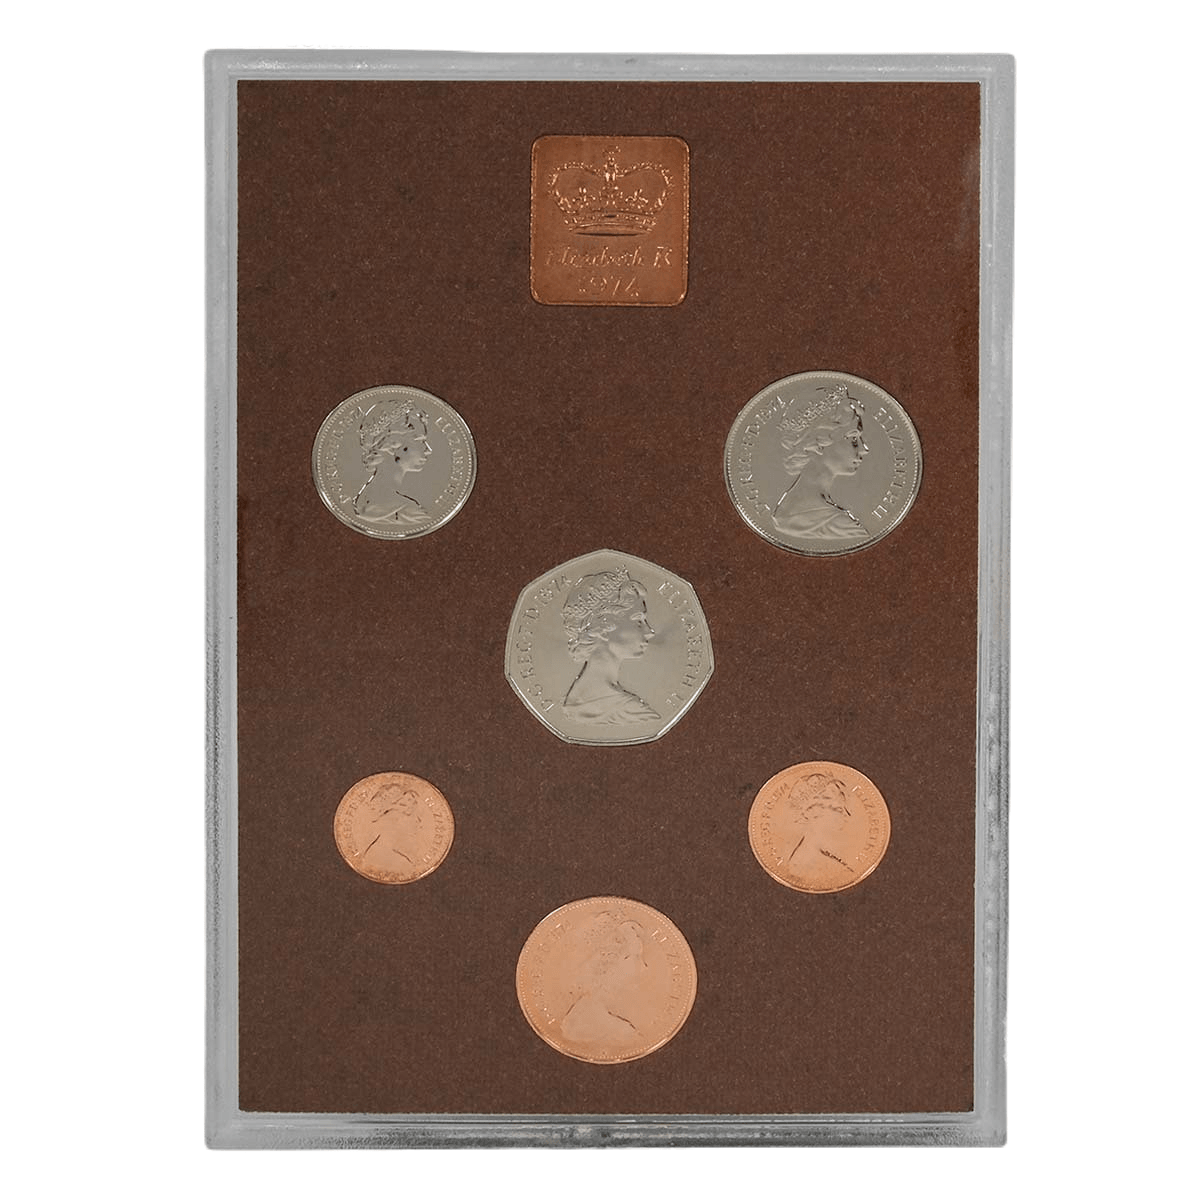 1974 UK Proof Annual 6 Coin Set - Loose Change Coins